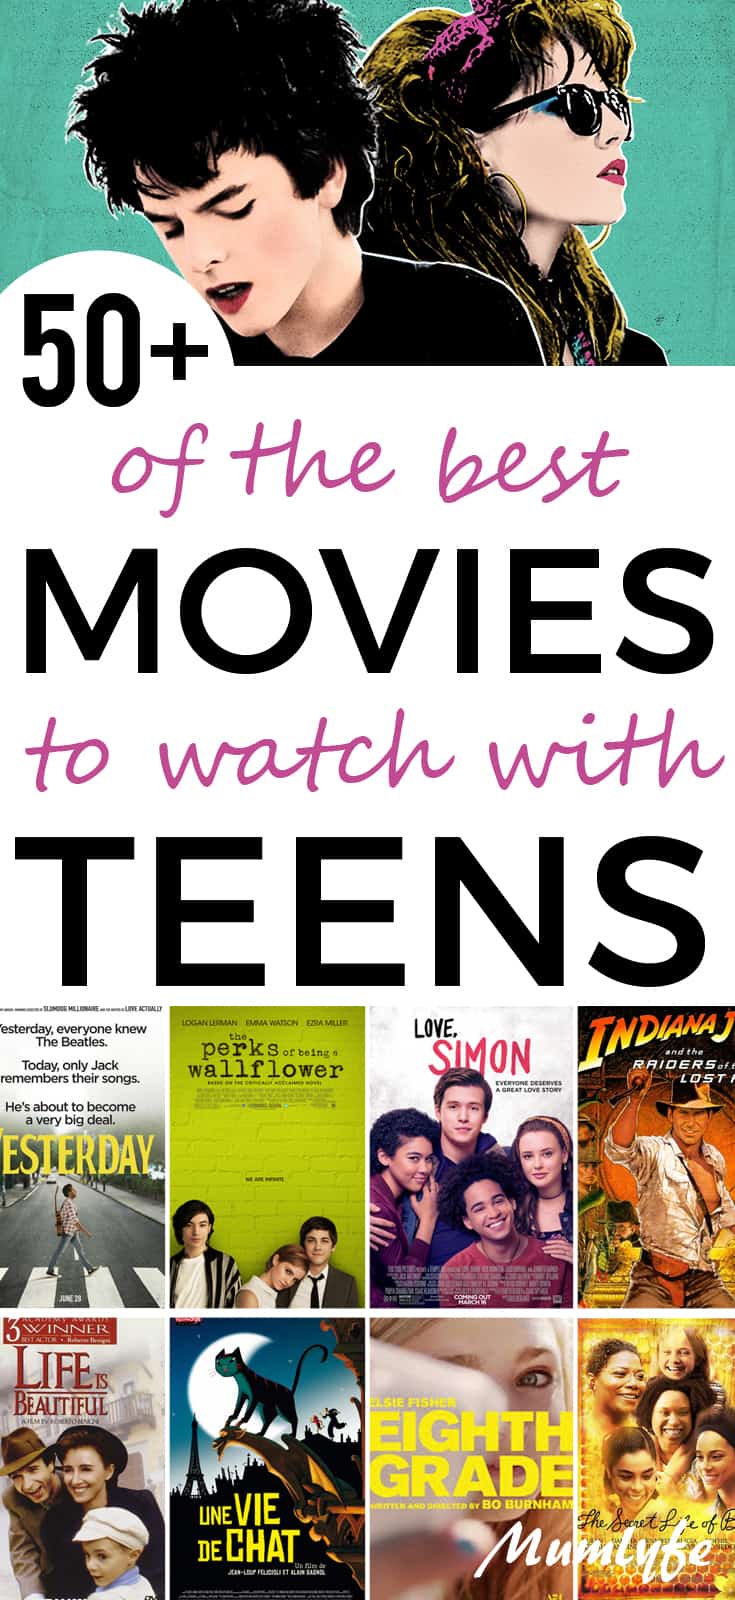 50 of the best movies to watch with teens